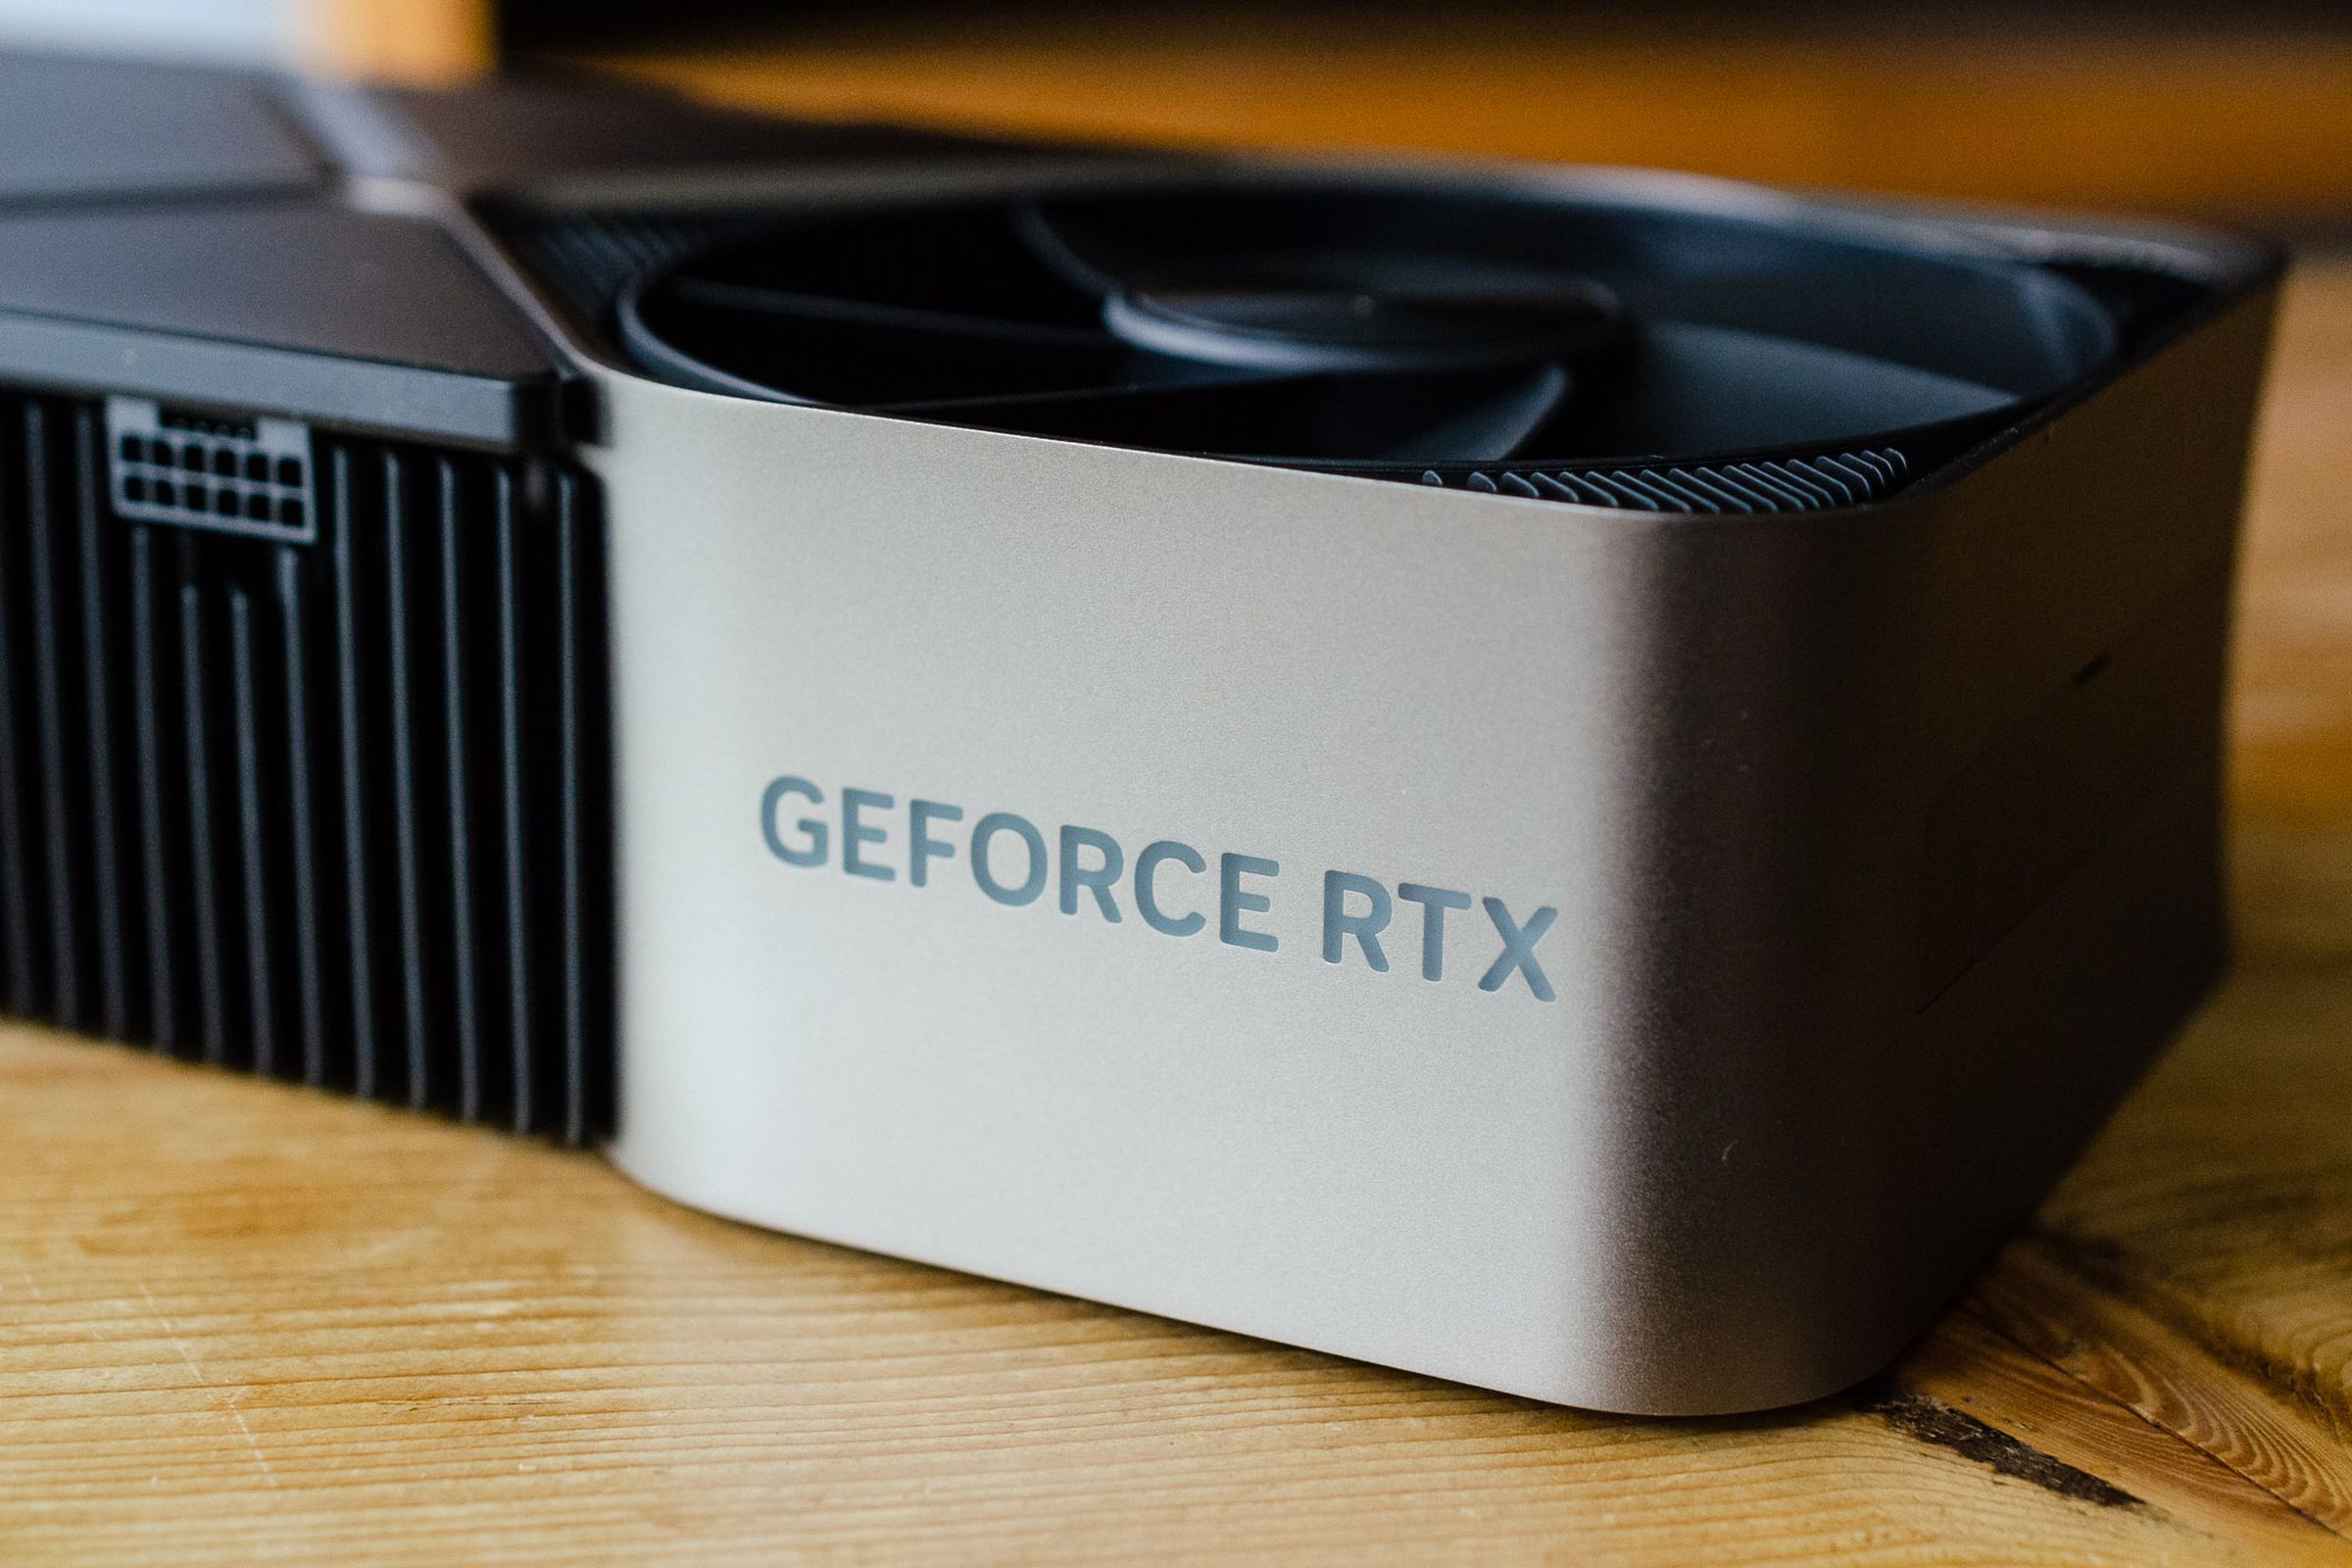 The GeForce RTX logo on the Nvidia GeForce RTX 4090 Founders Edition.